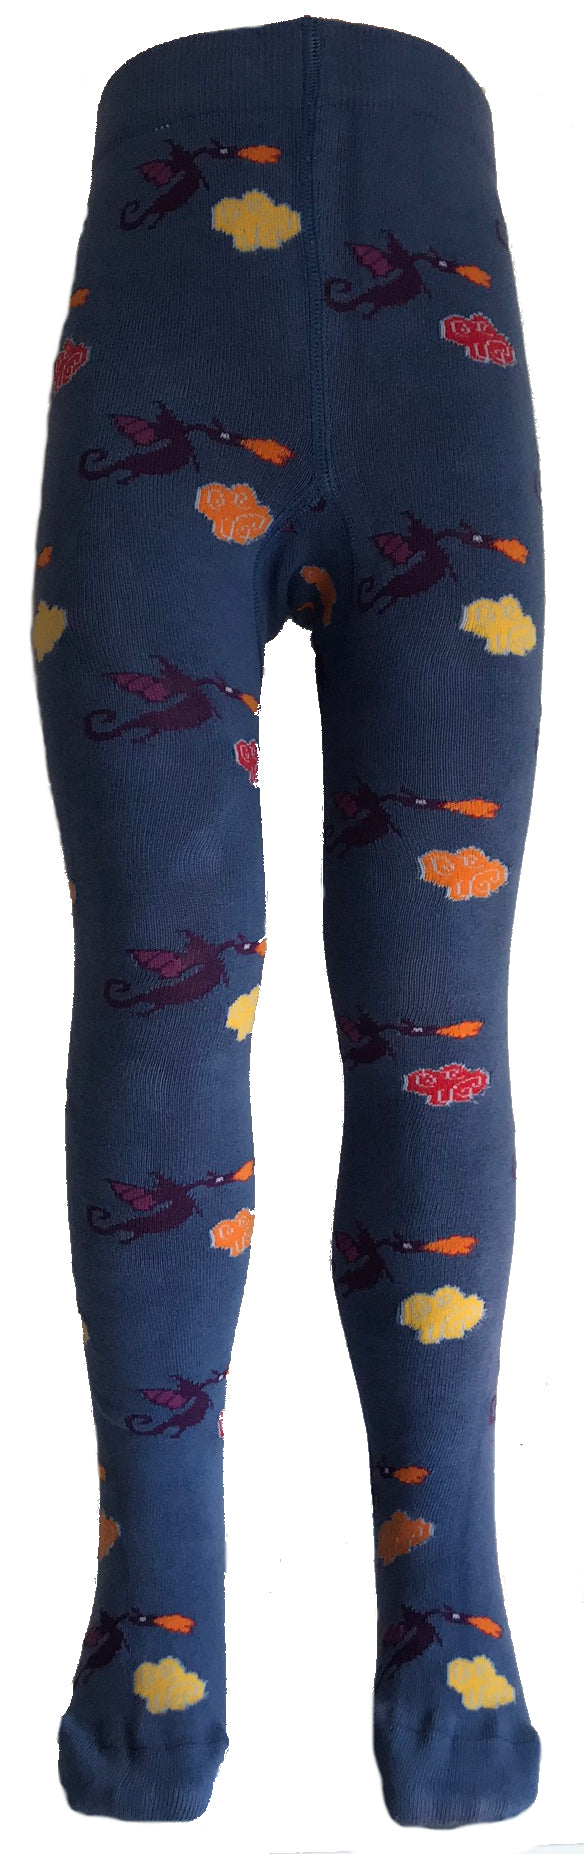 S & S Tights - Dragons